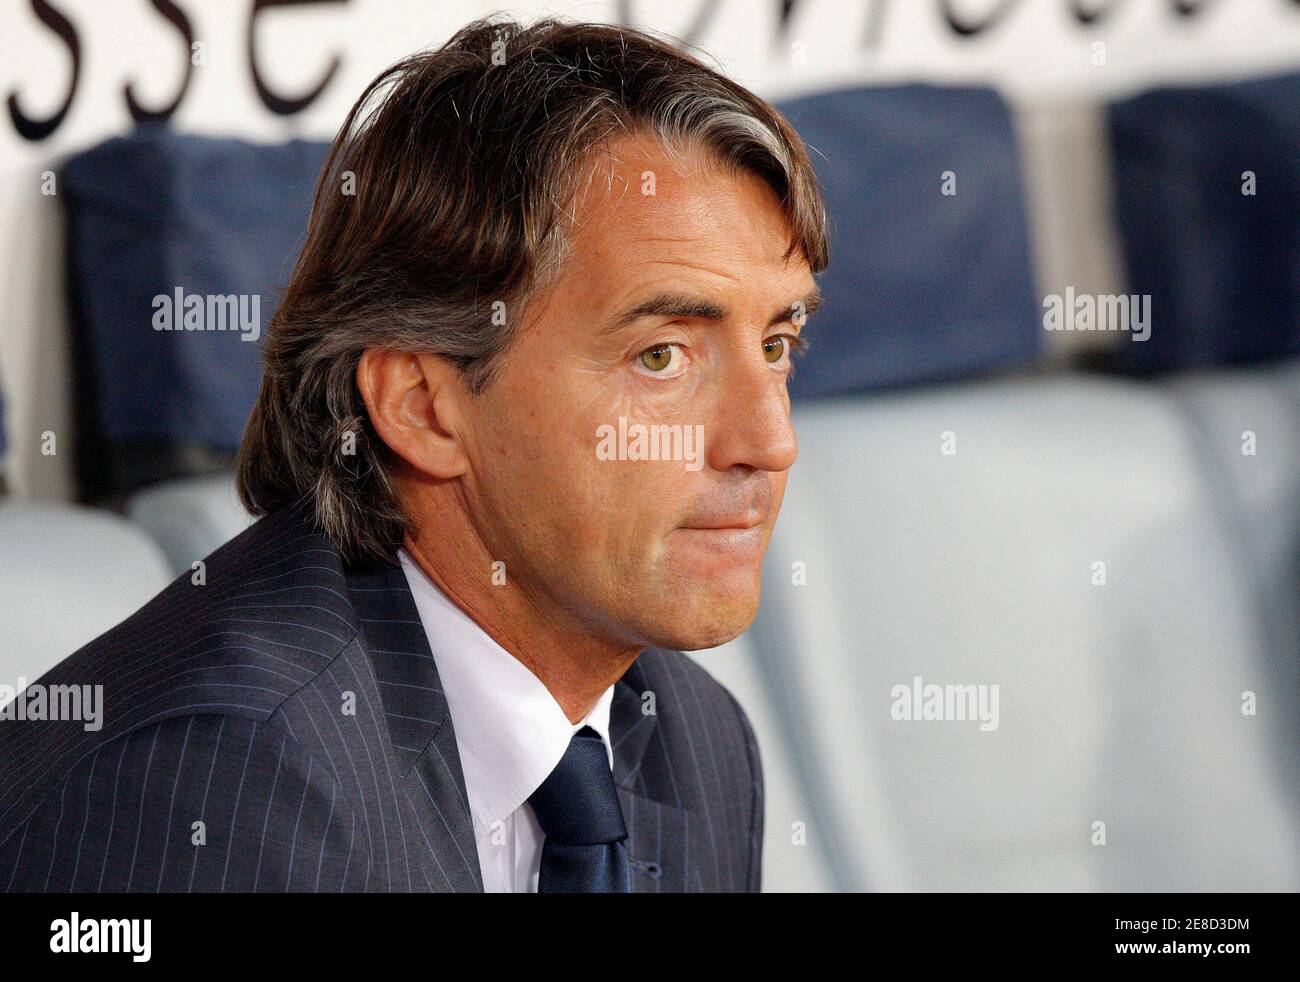 Inter Milan coach Roberto Mancini looks on before the Italian Cup soccer  final match against AS Roma at the Olympic stadium in Rome May 24, 2008.  Wednesday's Italian newspapers said former Chelsea